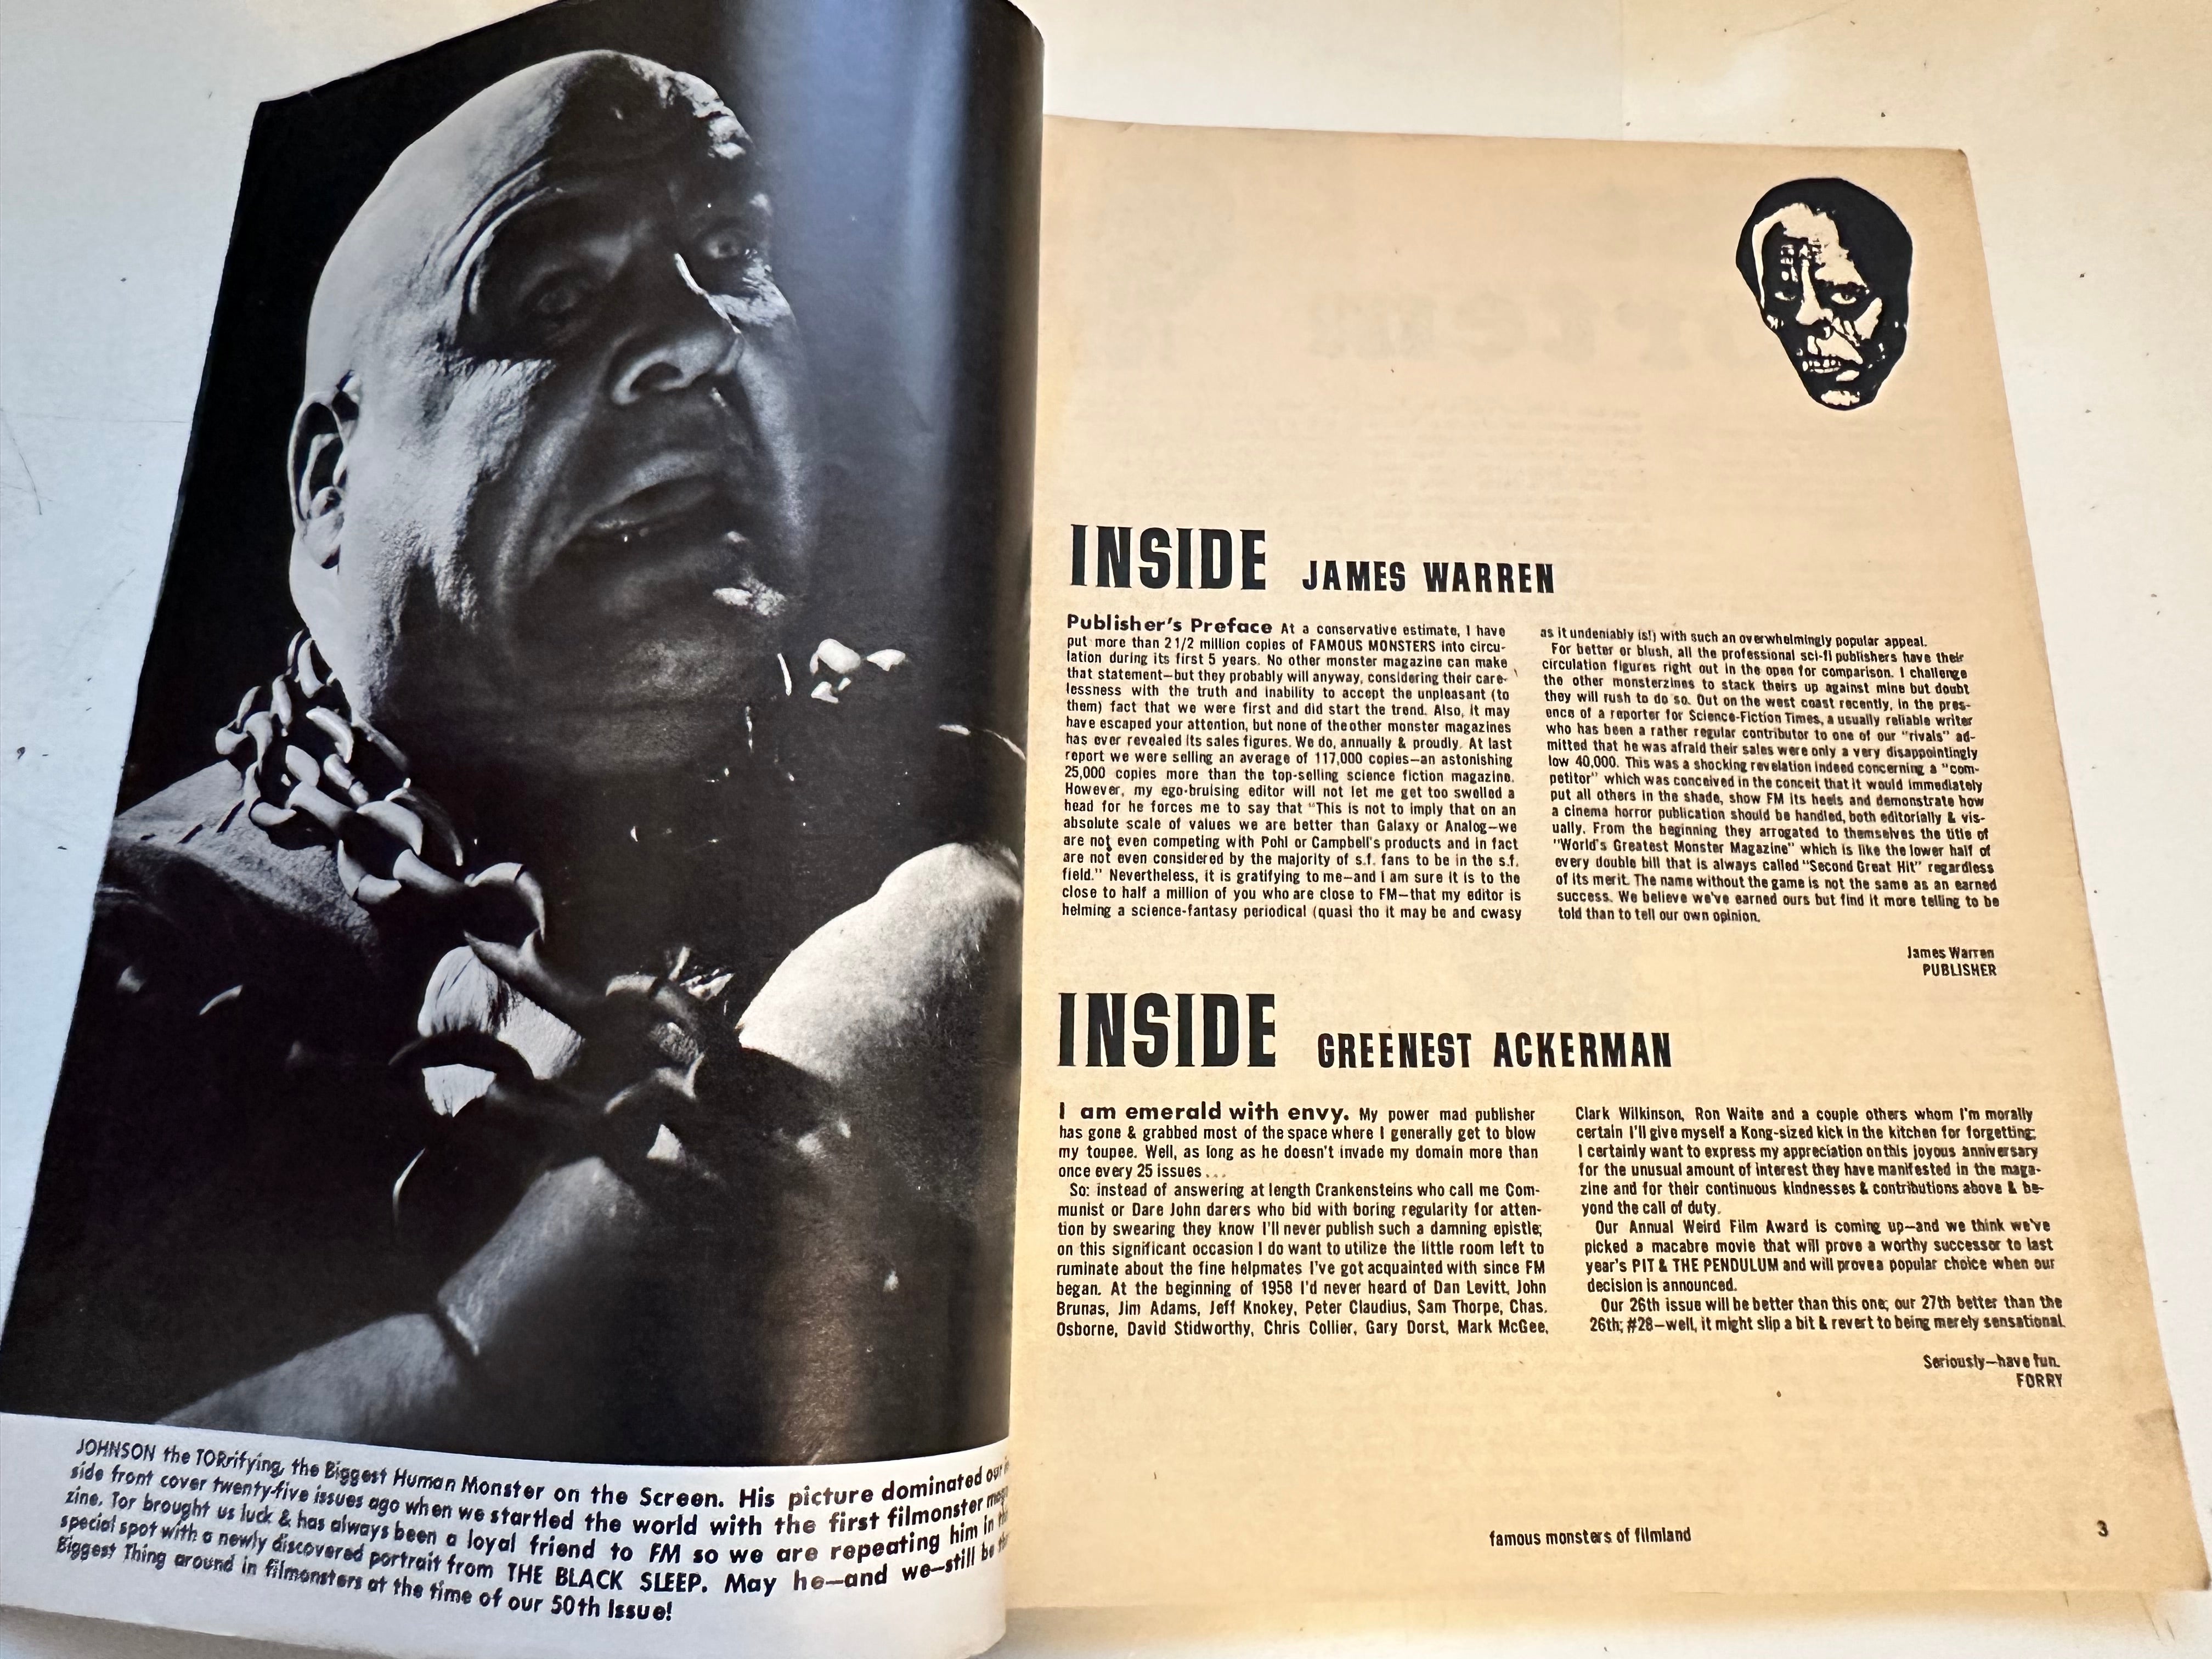 Famous Monsters of Filmland #25 King Kong issue 1963